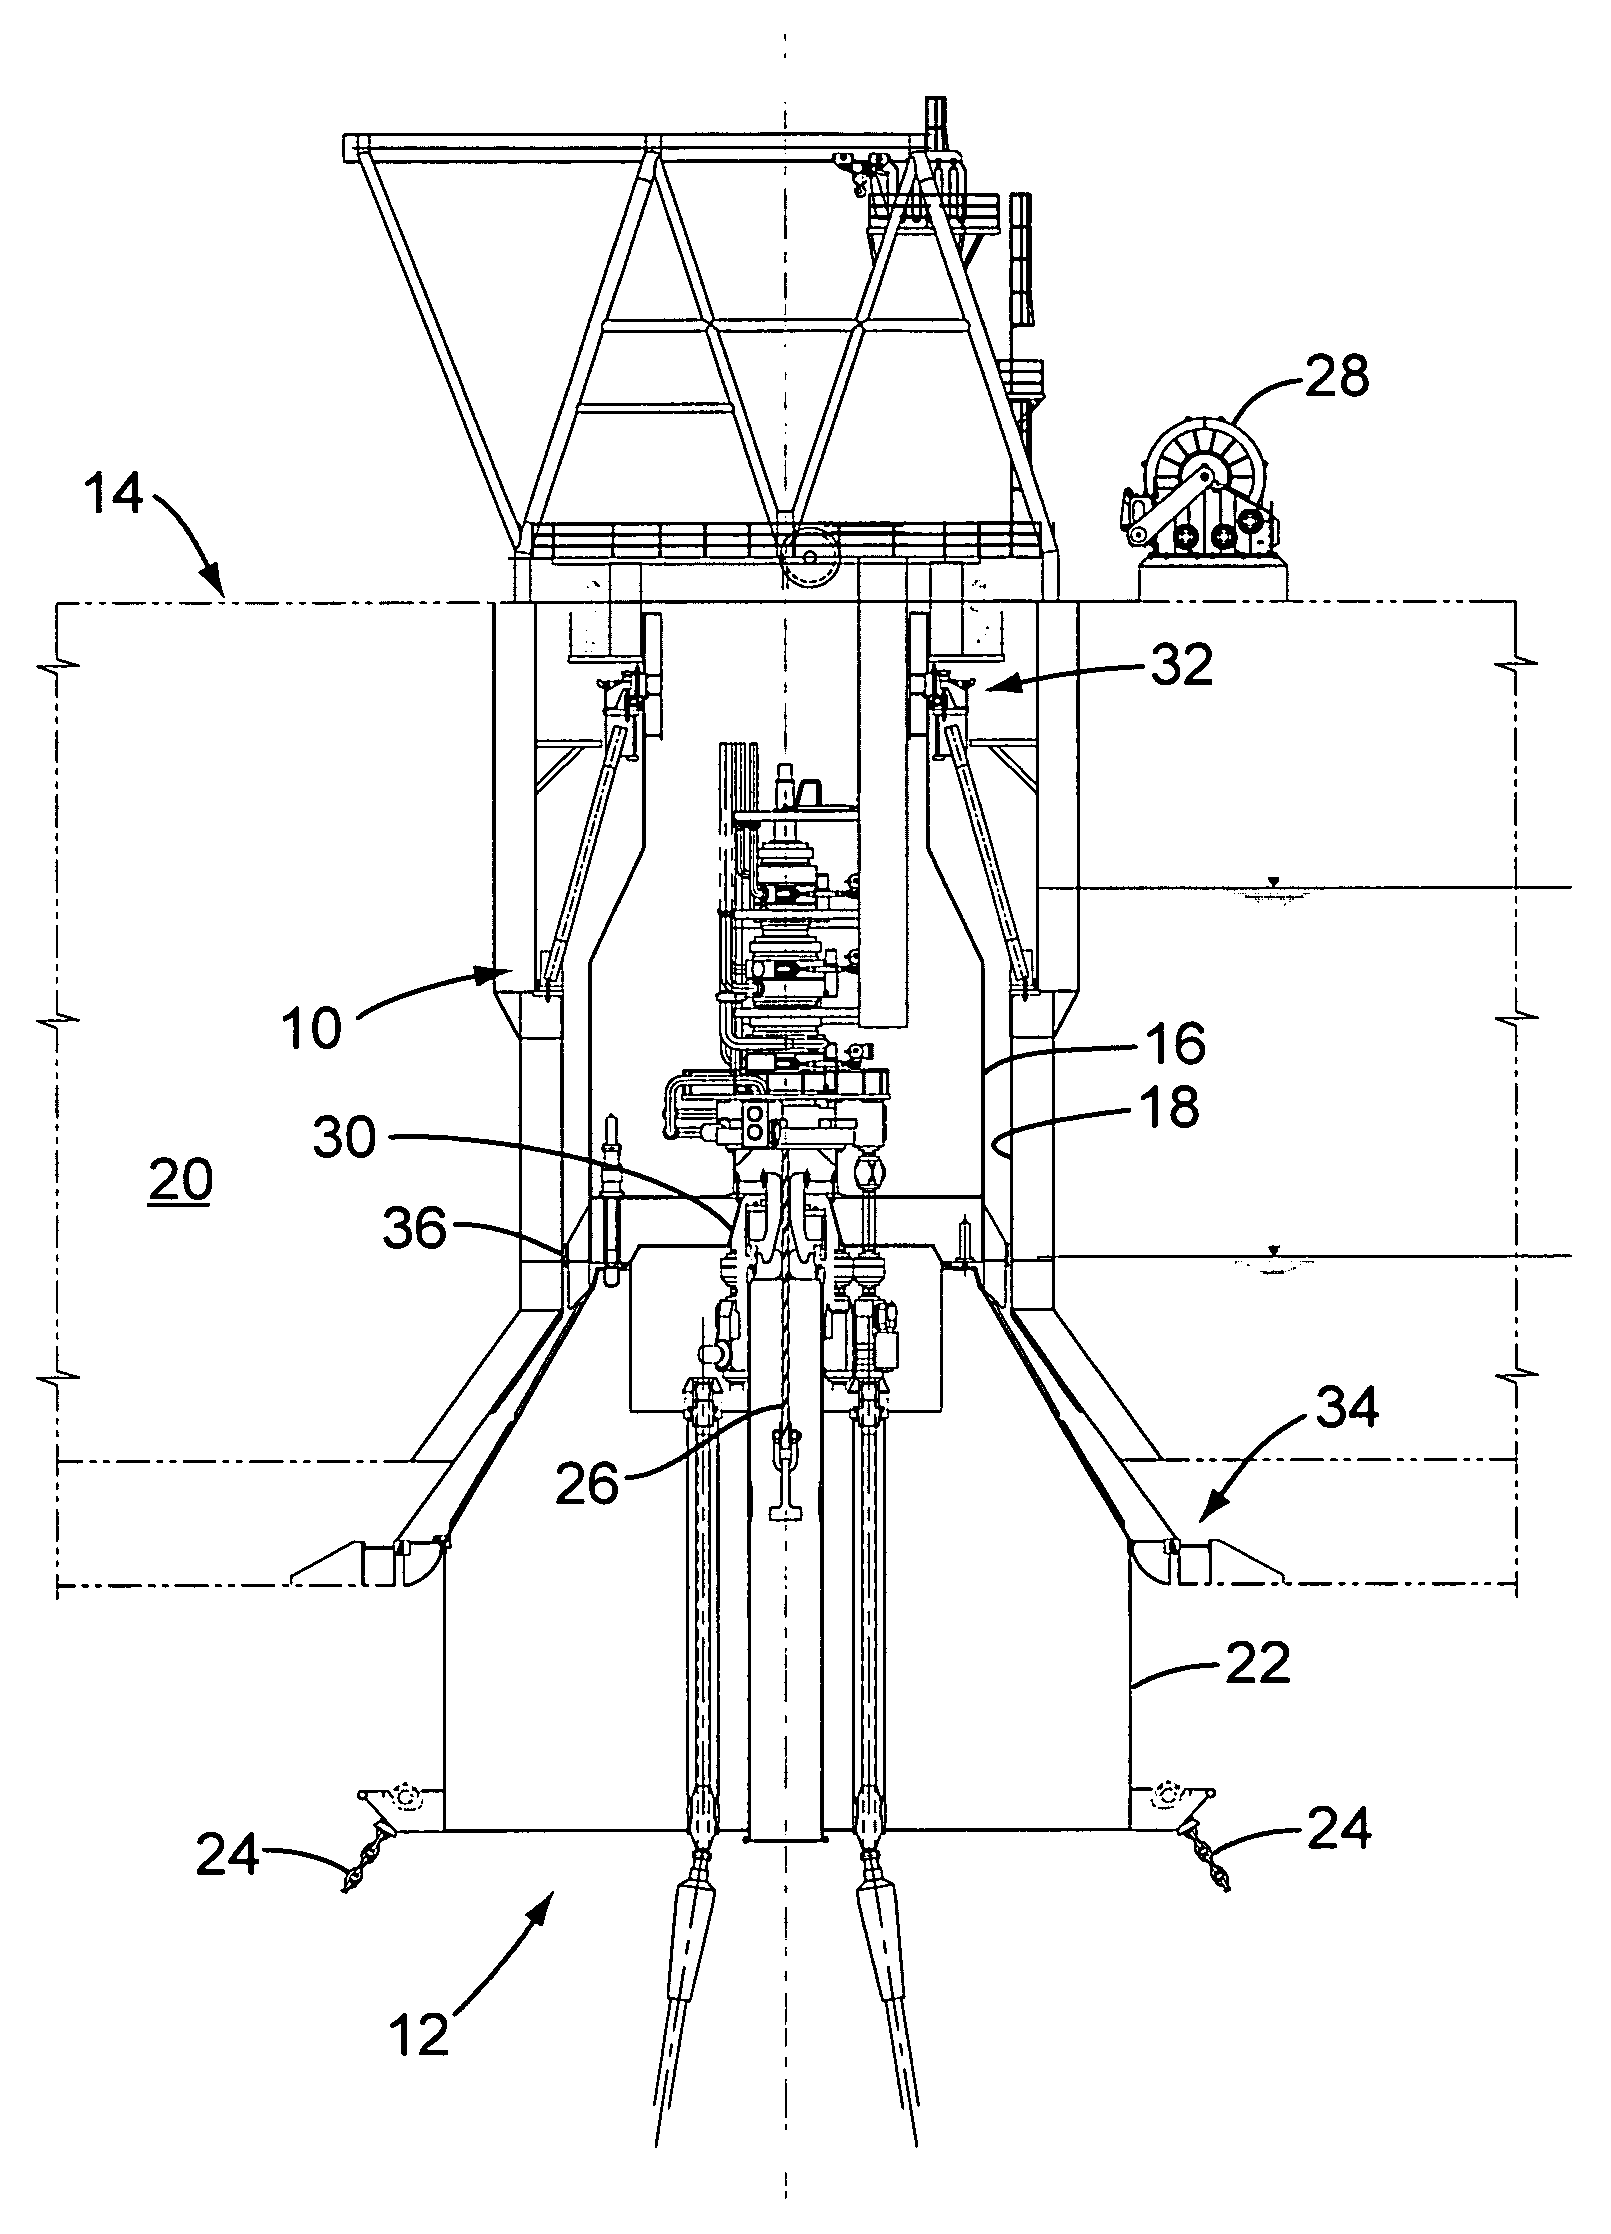 Upper bearing support assembly for internal turret